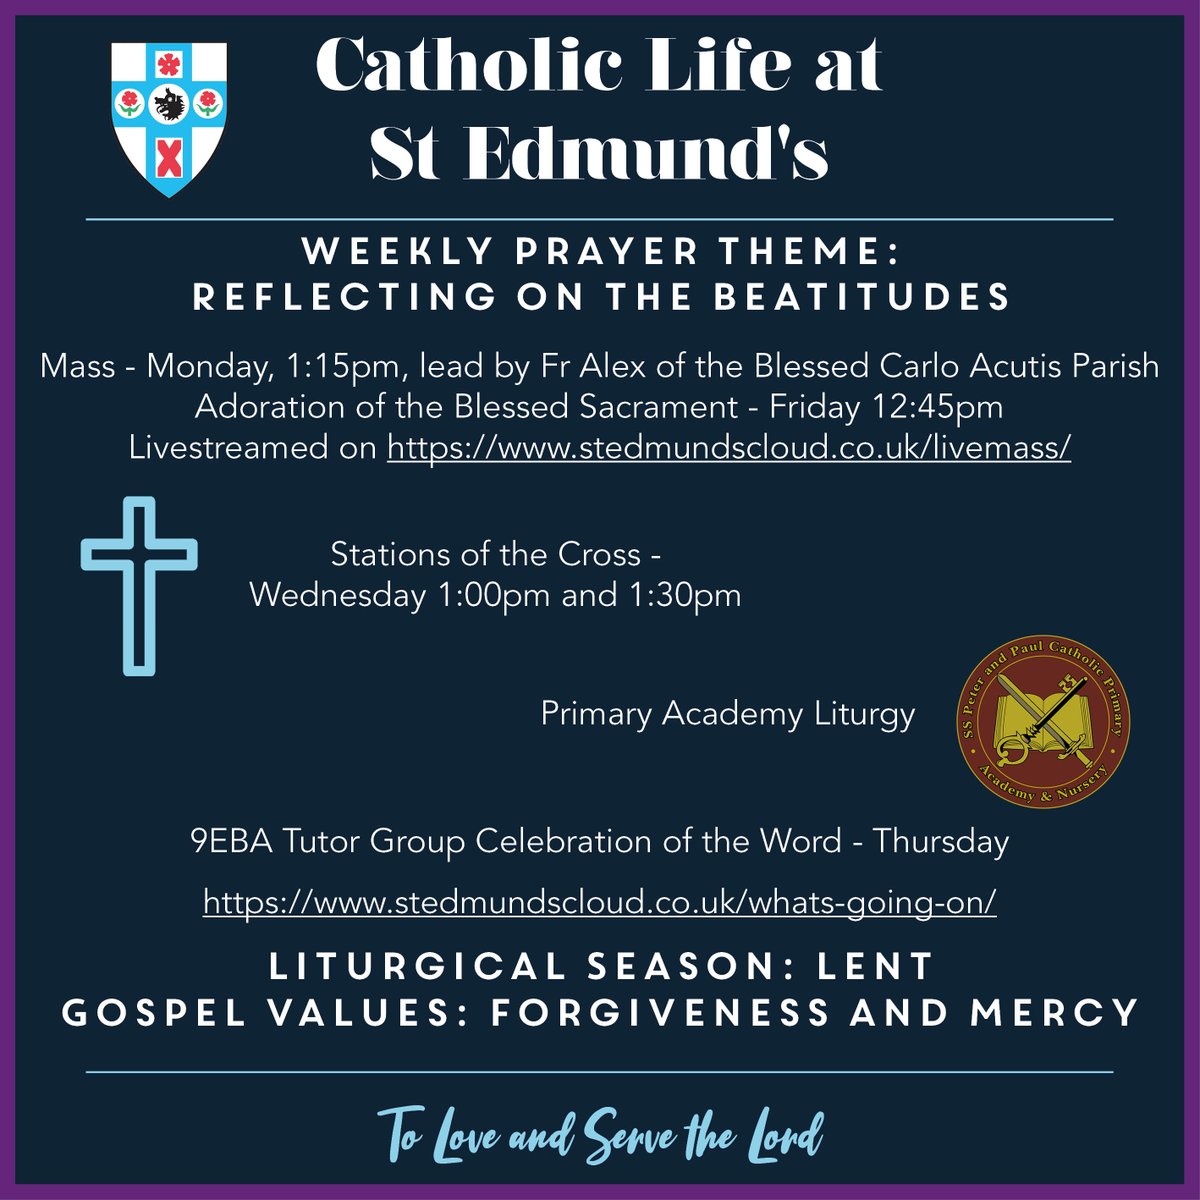 📢 What's Going On This Week - Catholic Life at St Edmund's

#catholiclife #catholicyouth #catholiccommunity